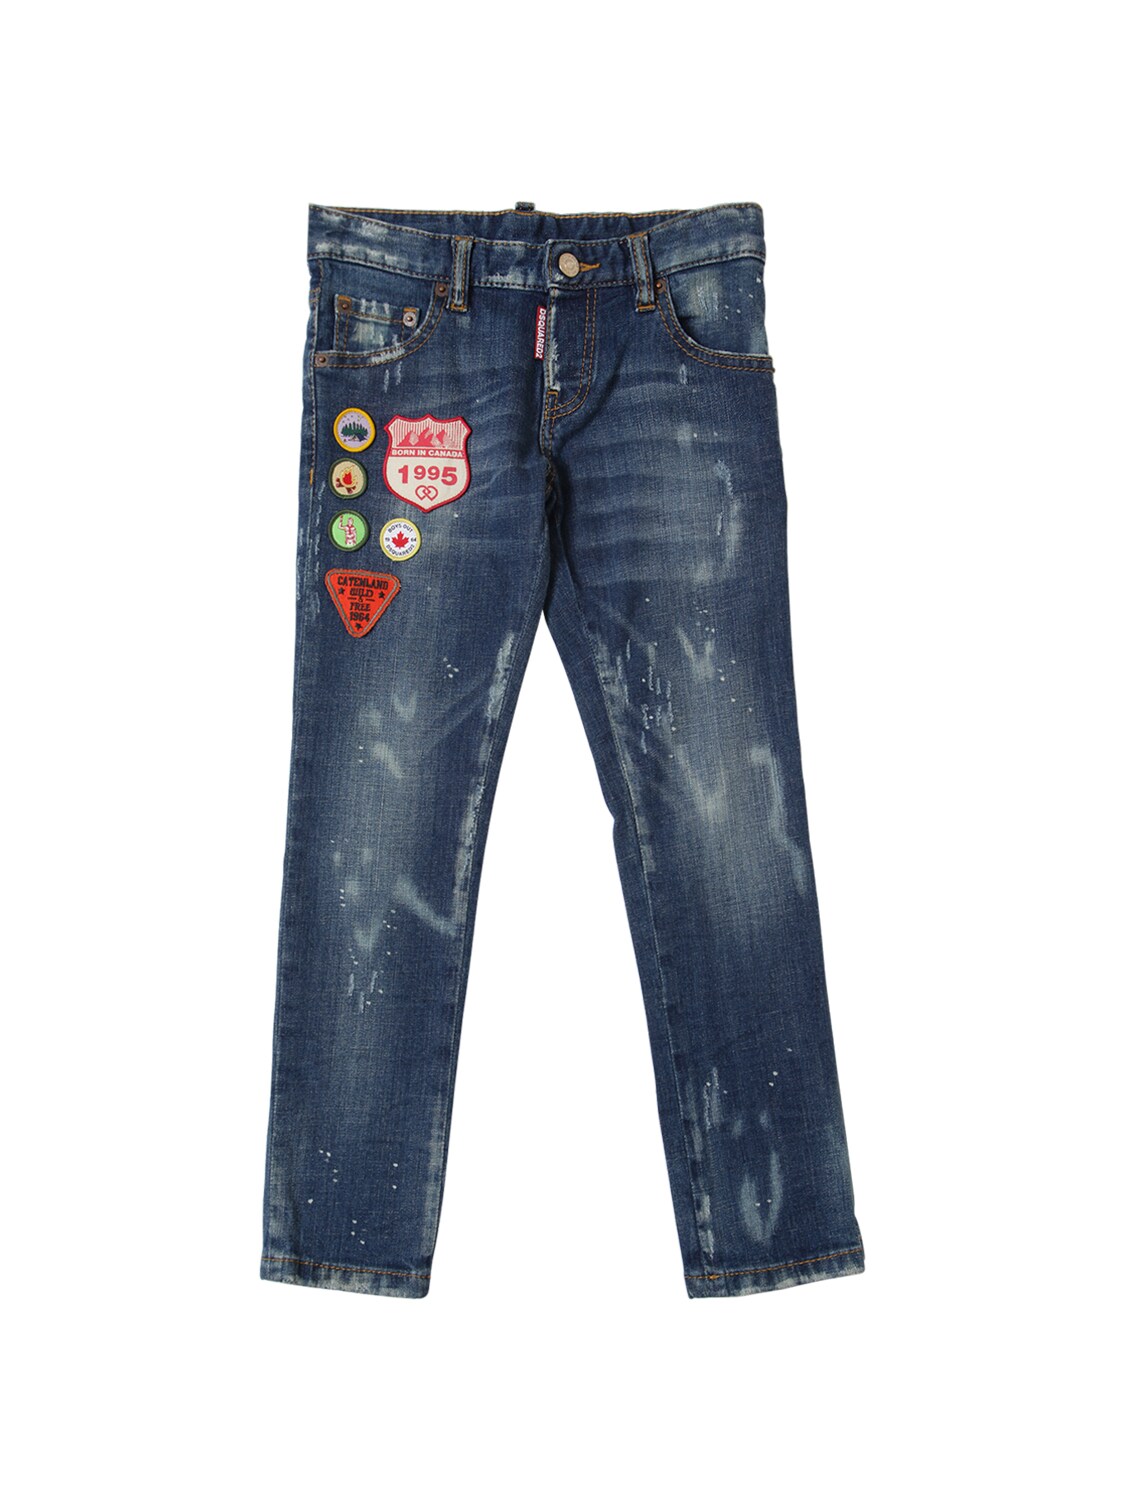 dsquared2 jeans 1975